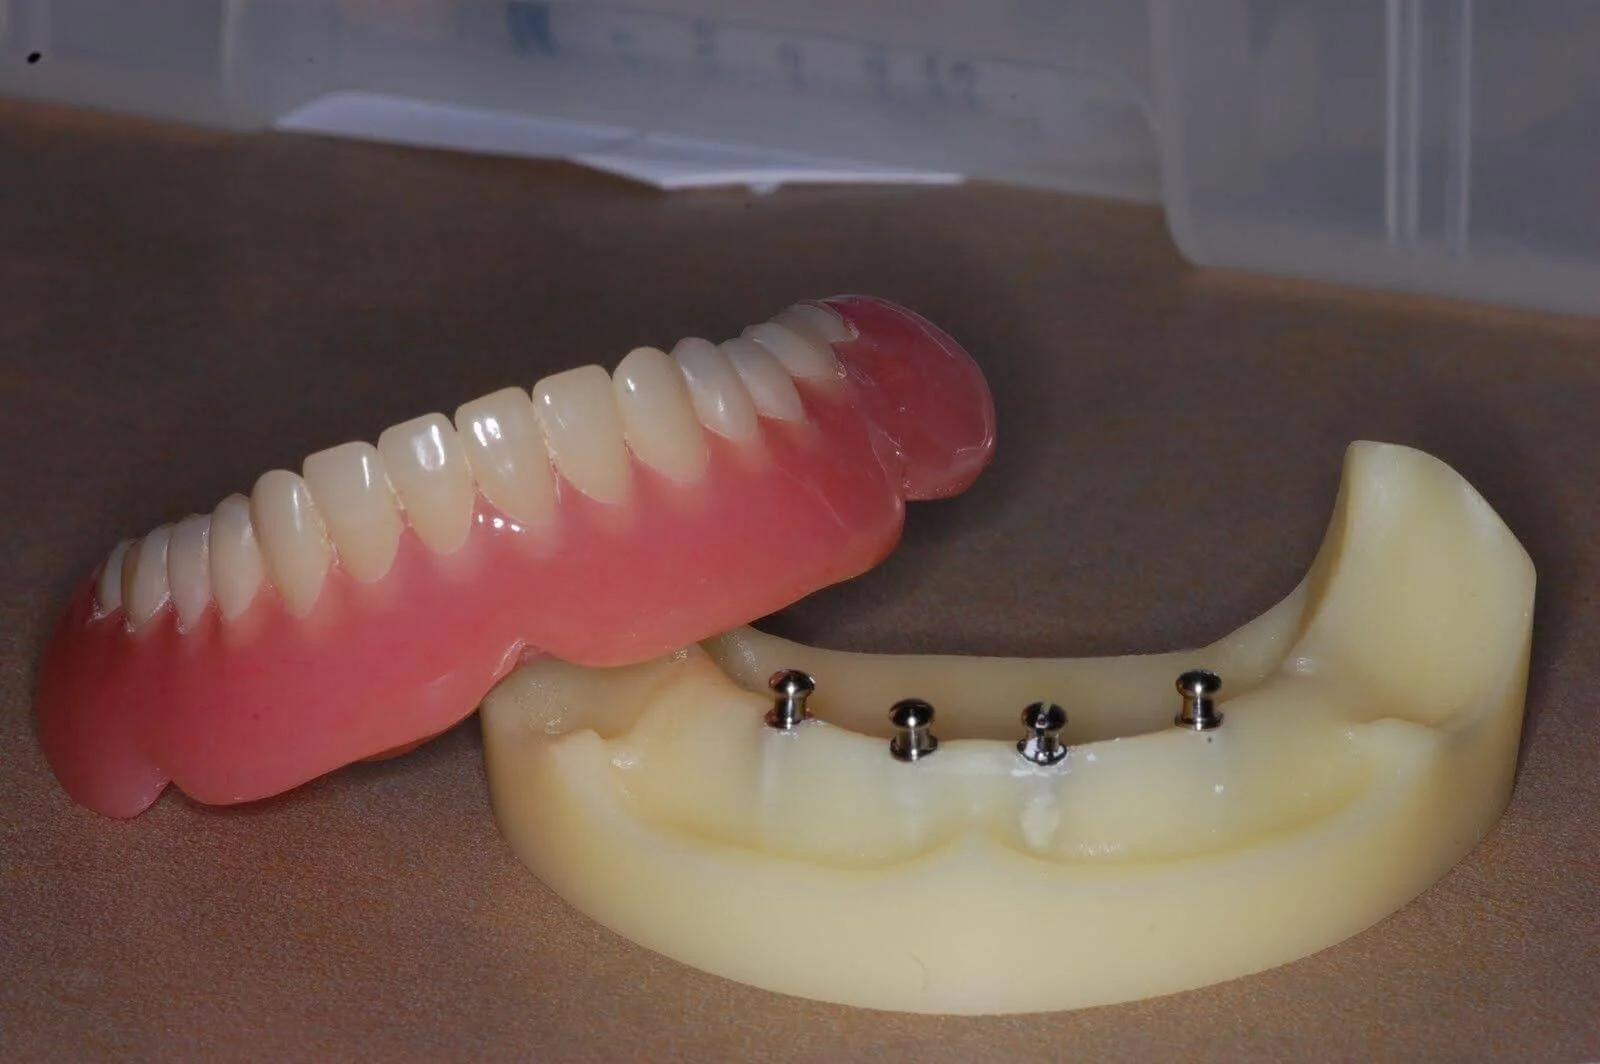 Dr_Gandhi_Dental_Clinic_Treatment_Image_Of_Teeth_Replacement_Foundatation